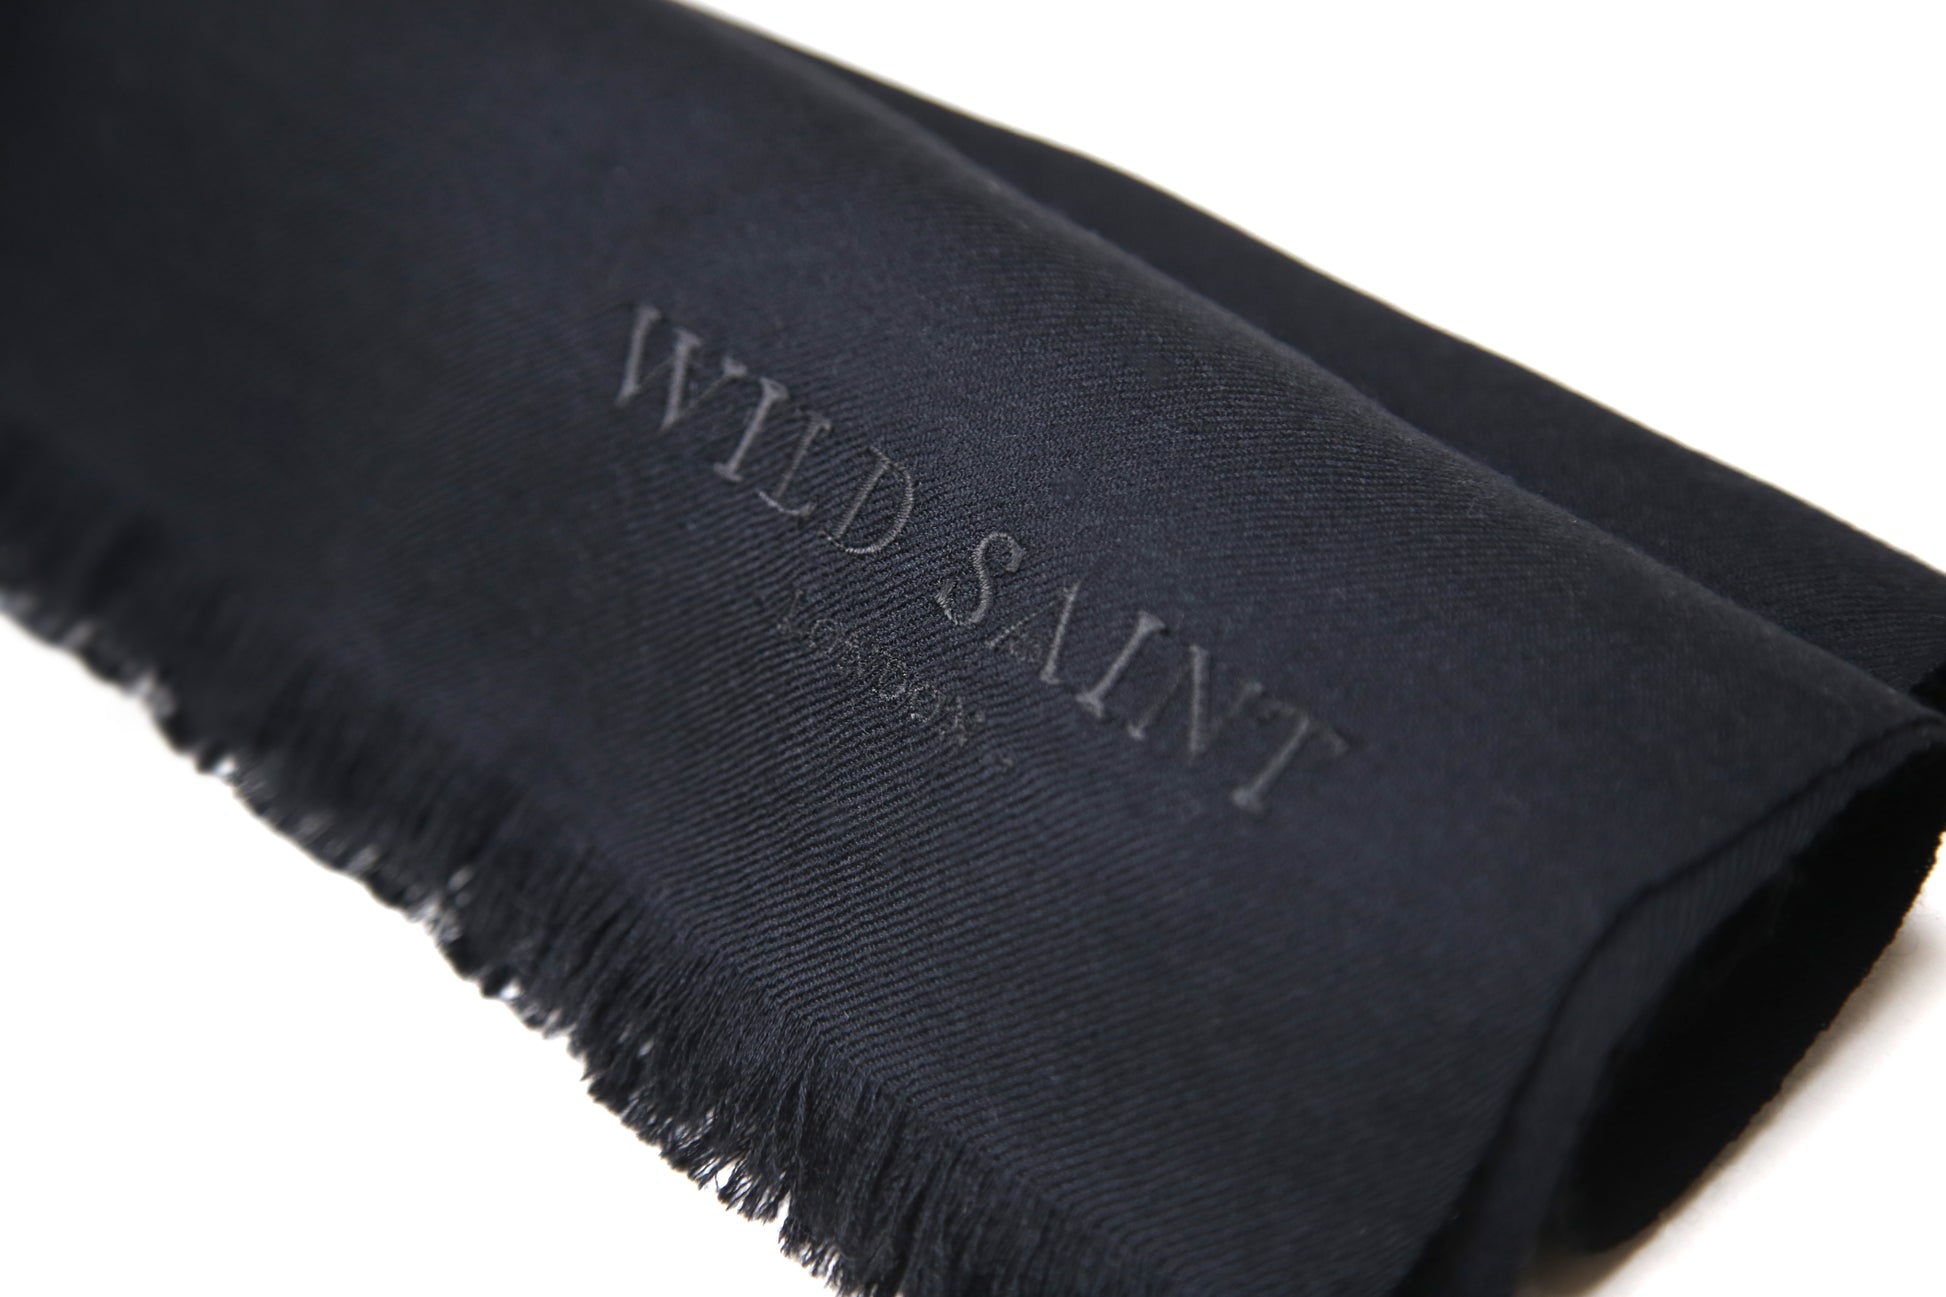 Black lightweight 100% cashmere scarf for women and men. Includes complimentary personlisation. Luxury cashmere scarves made in Italy